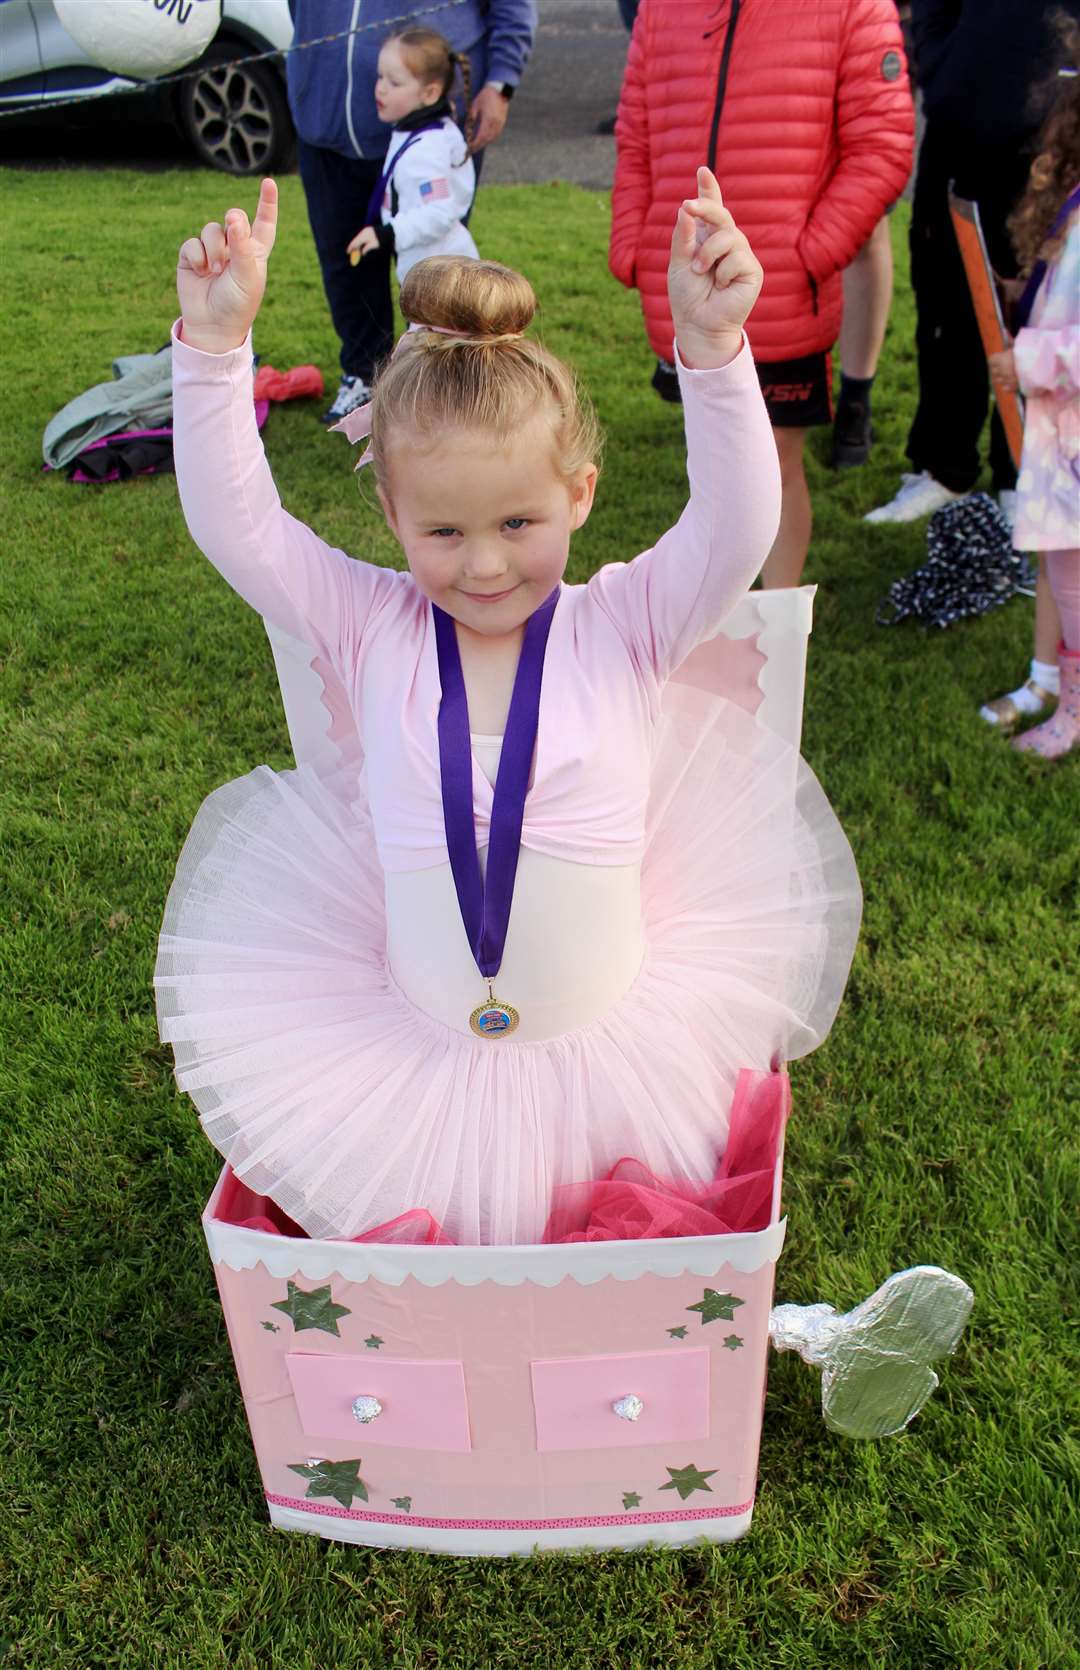 Lois Wann (3) won a first prize after appearing as a ballerina in a music box. Picture: Alan Hendry